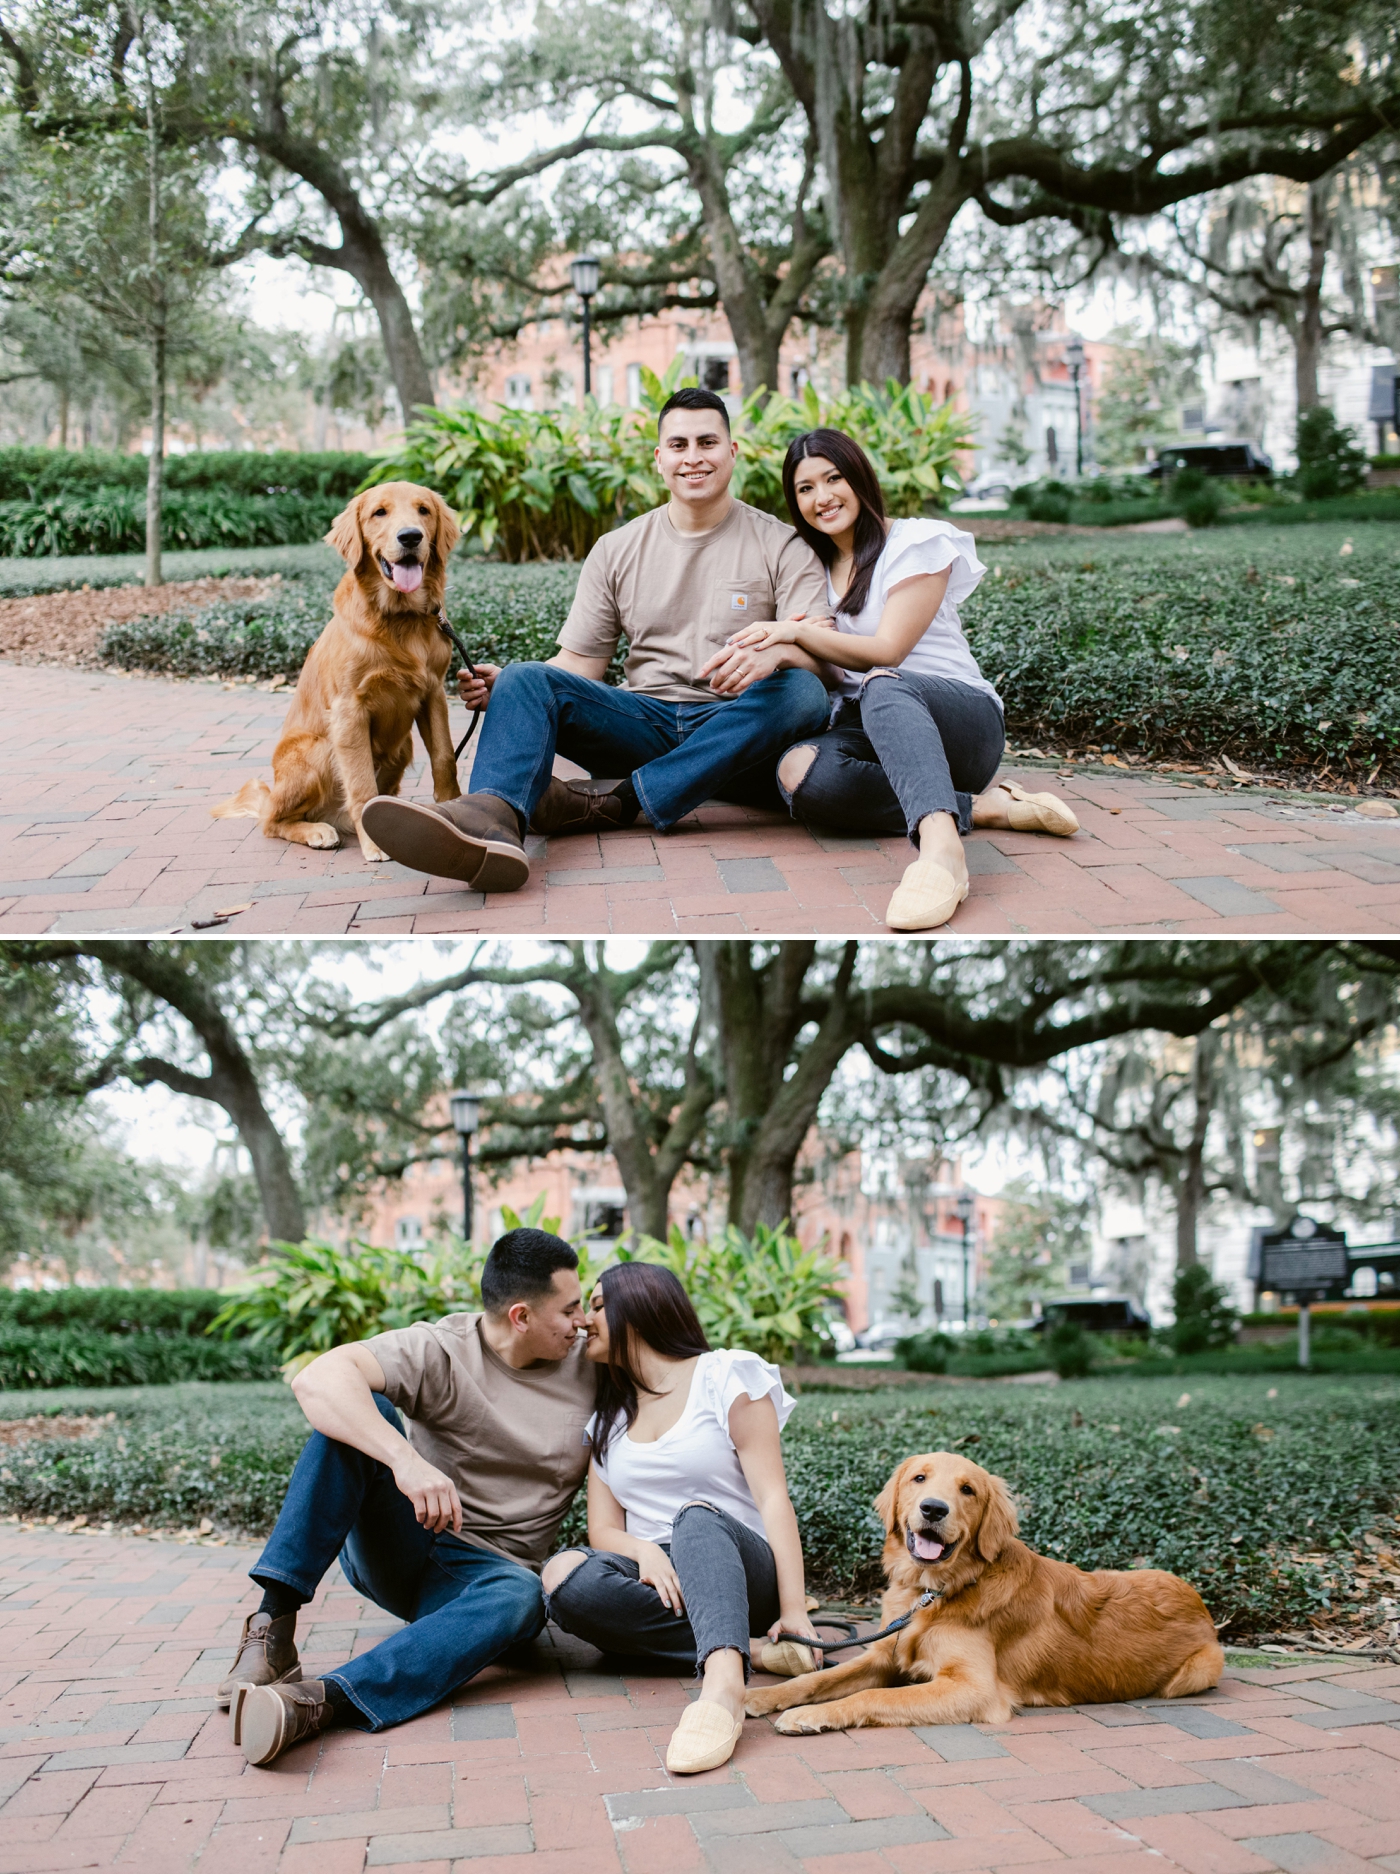 Couples photos in Savannah by Izzy + Co.